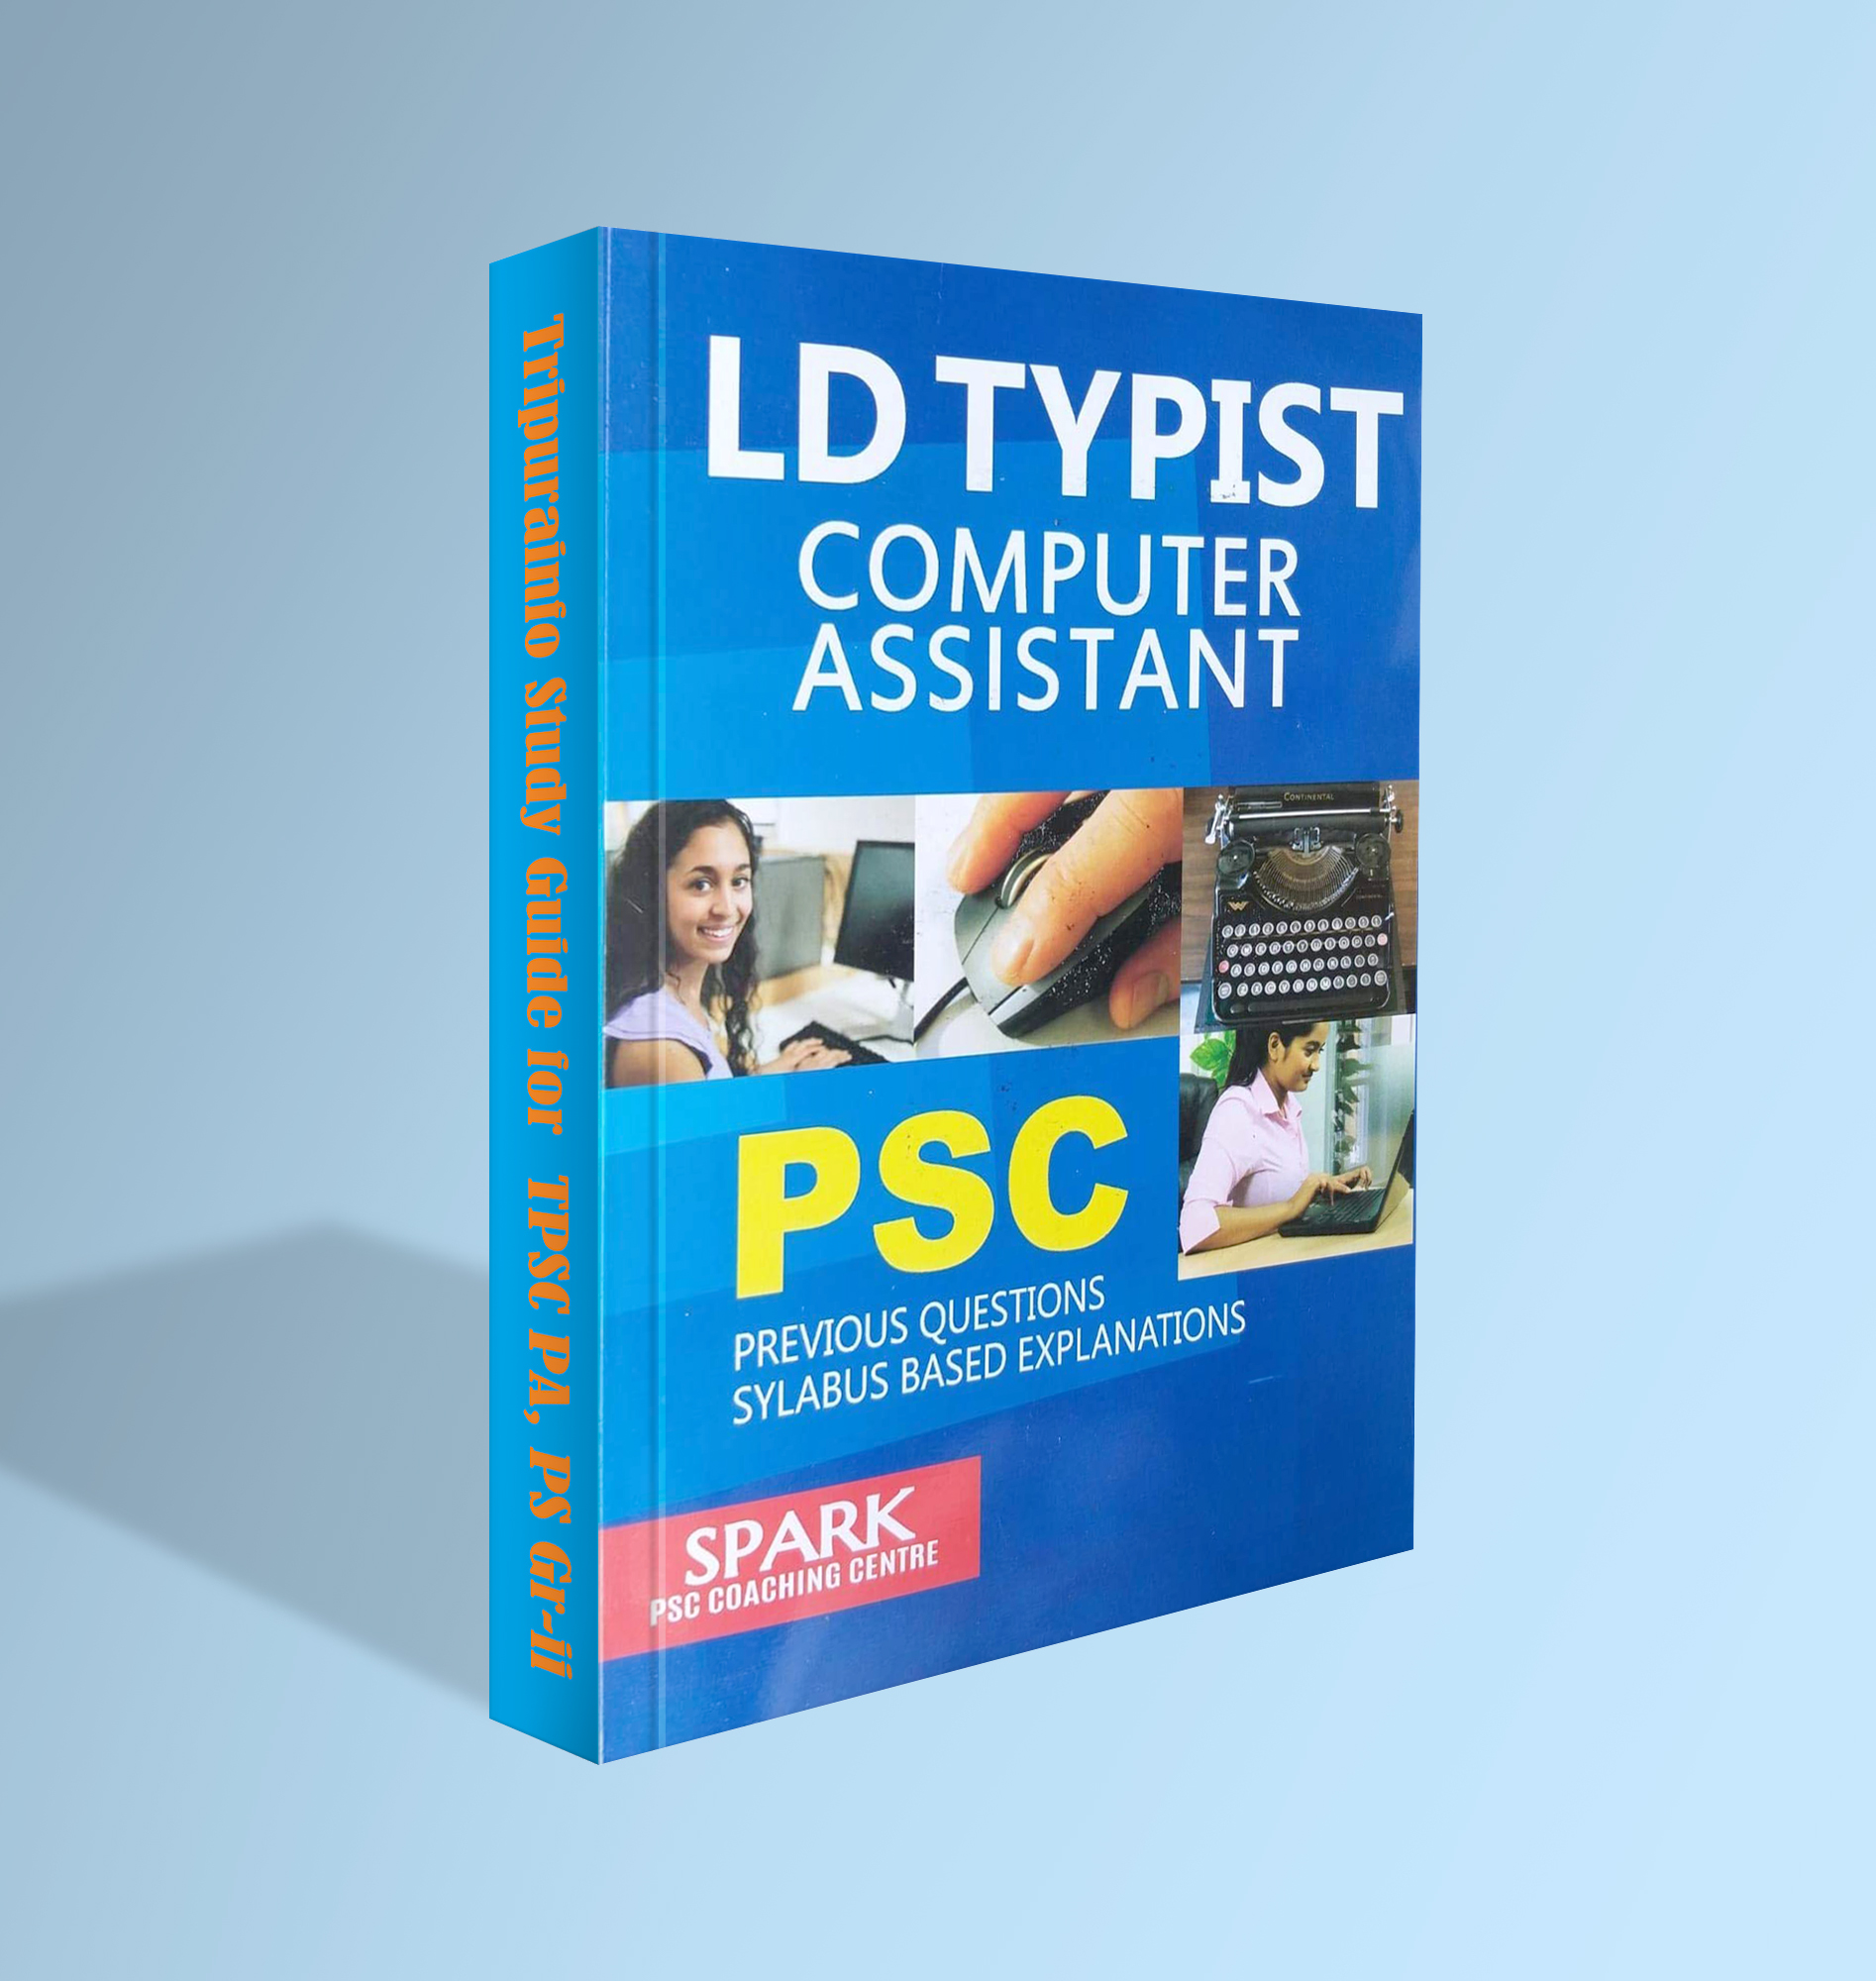 LD Typist Computer Assistant pic